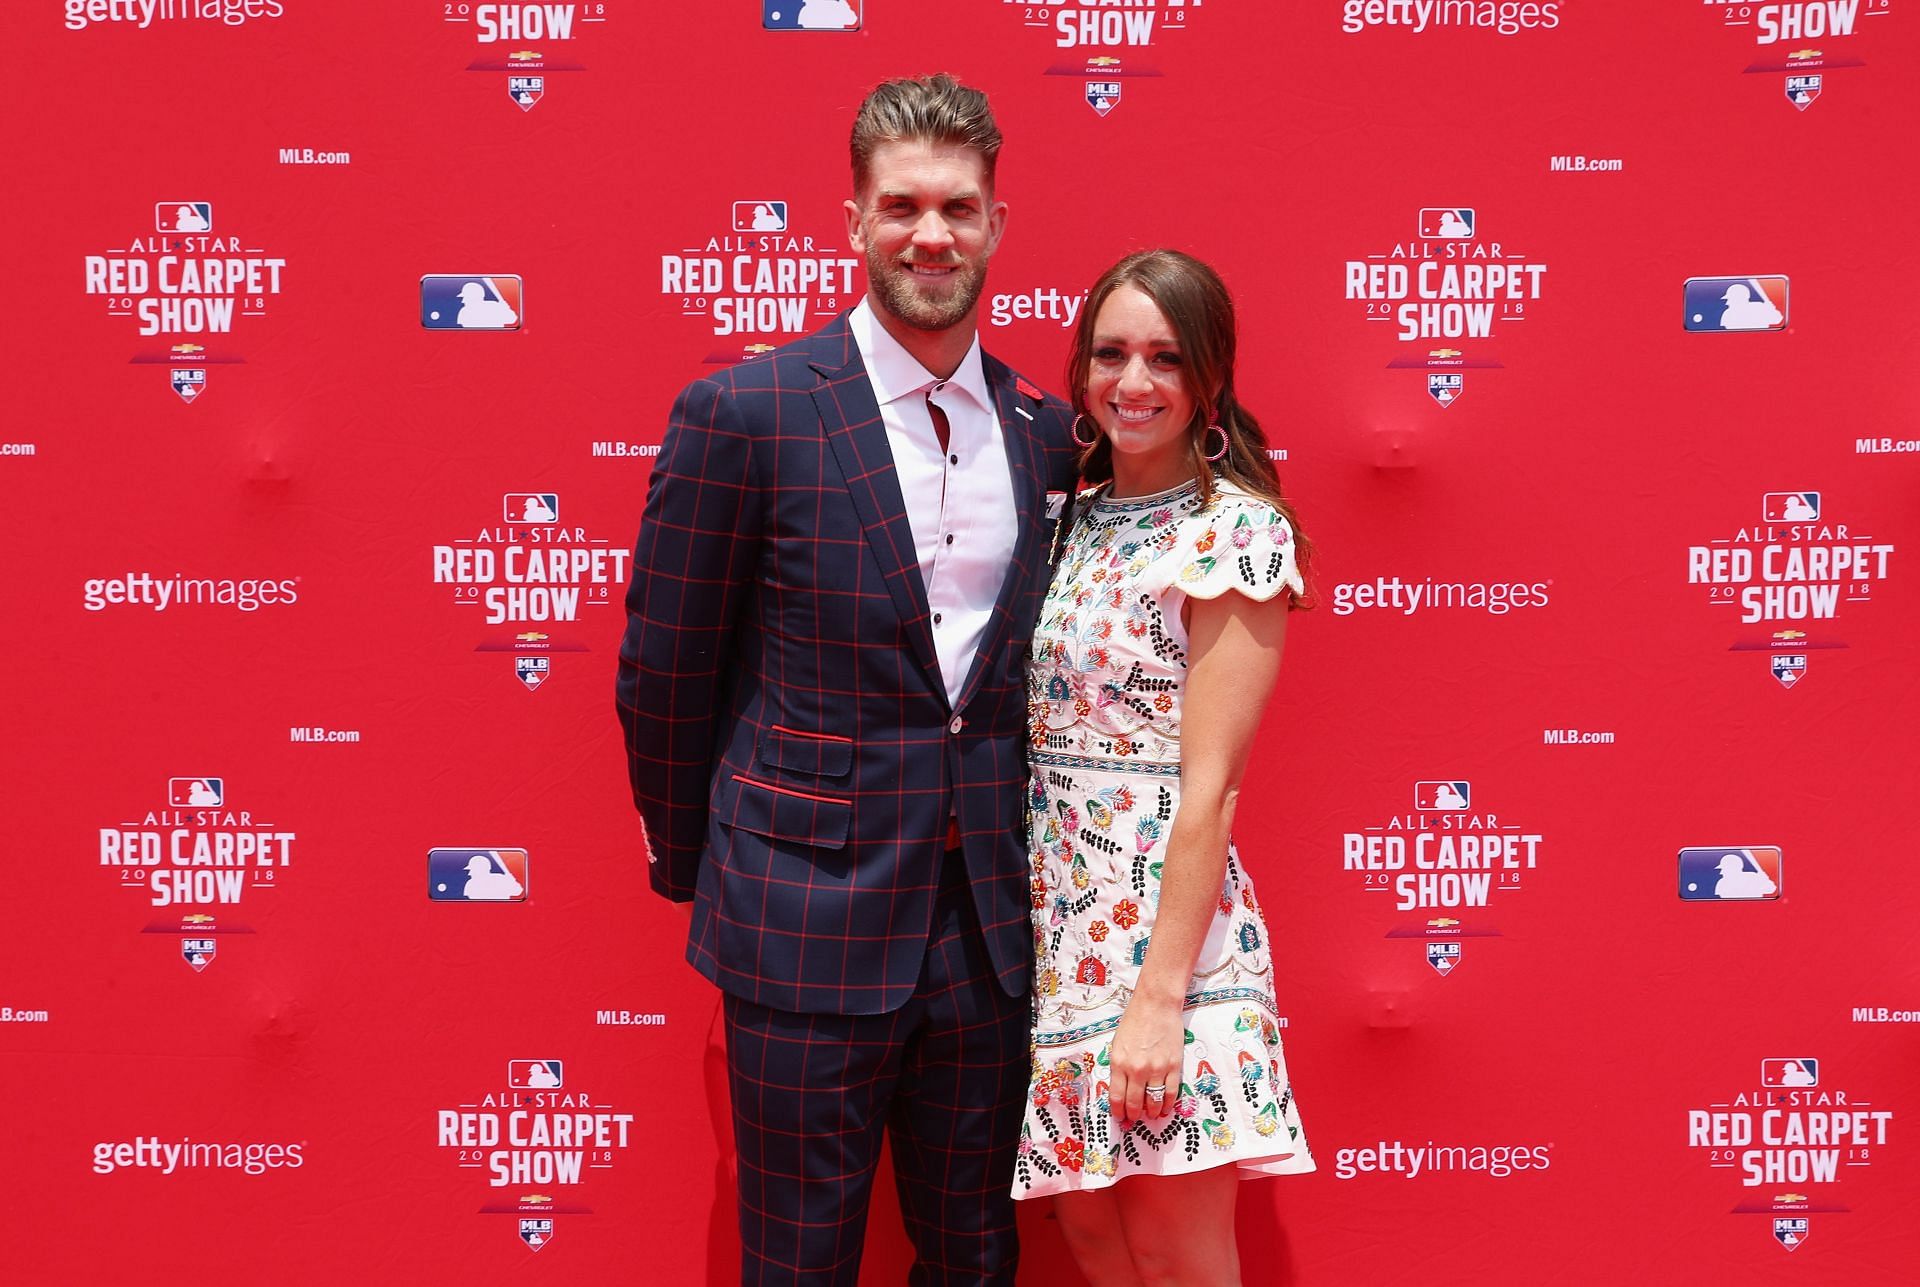 Kayla and Bryce Harper at the 89th MLB All-Star Game Red Carpet Show